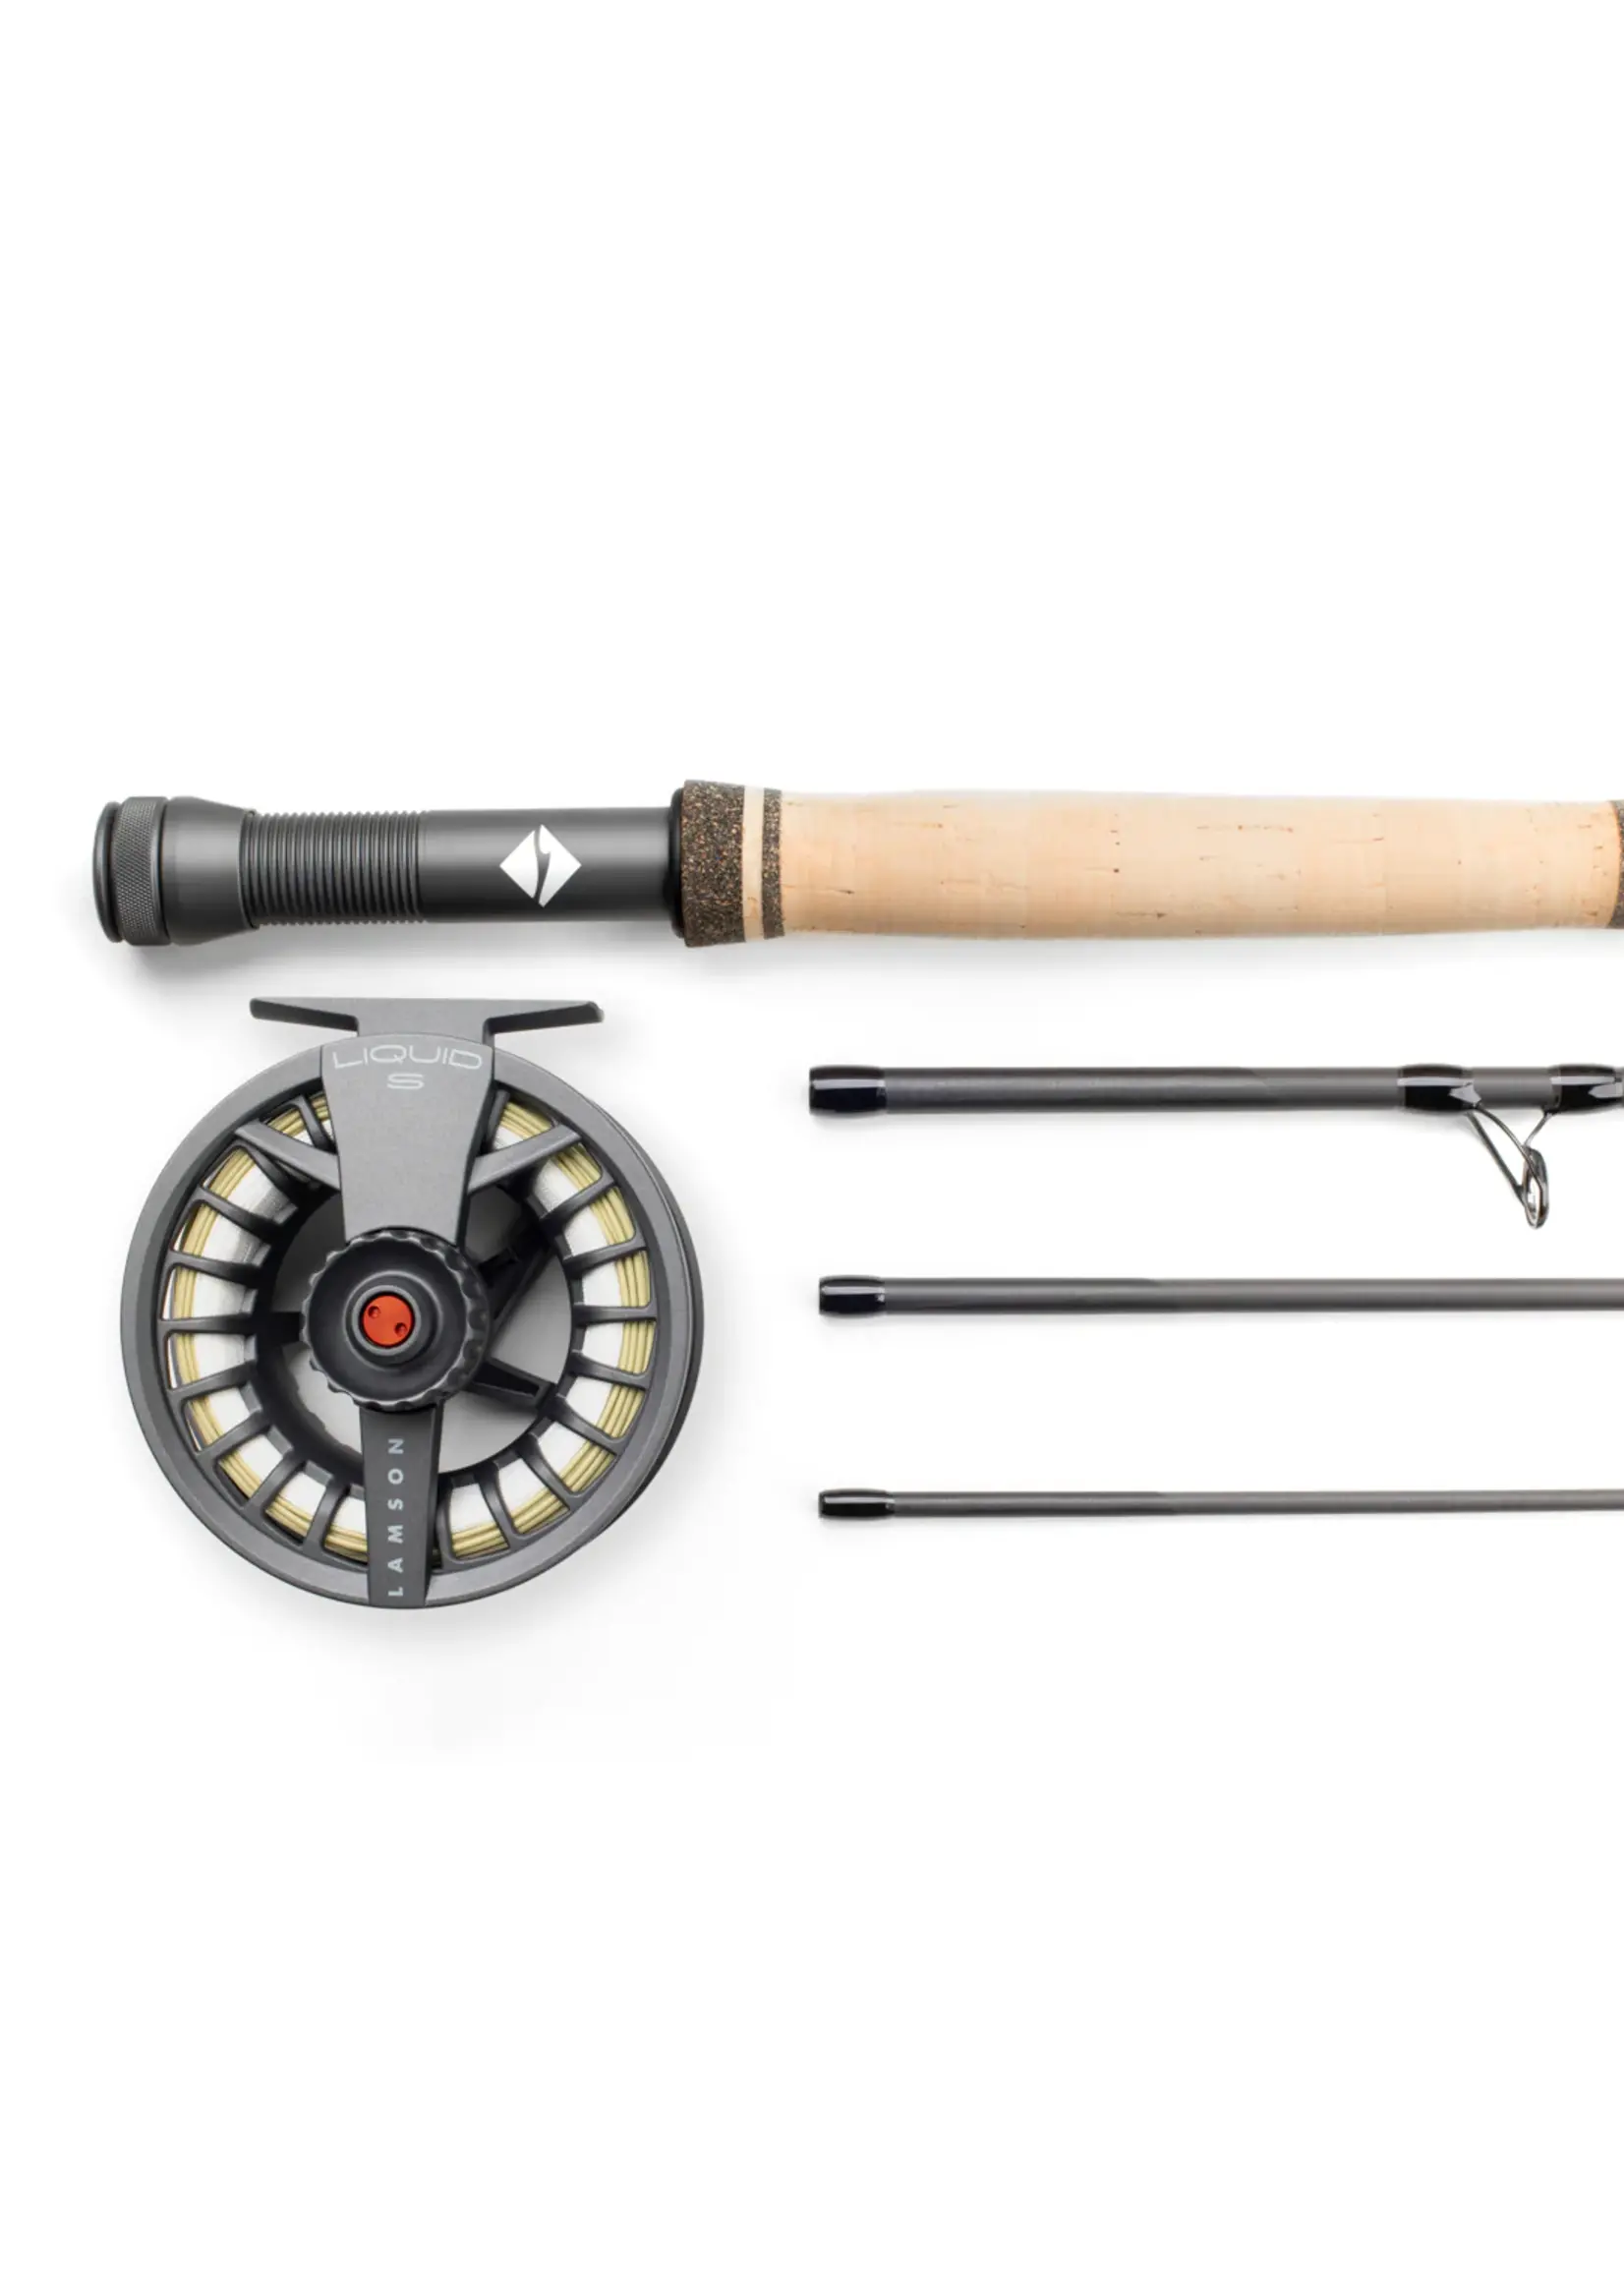 Waterworks-Lamson Lamson Liquid Outfit W/ Fly Line, Leader, and Backing